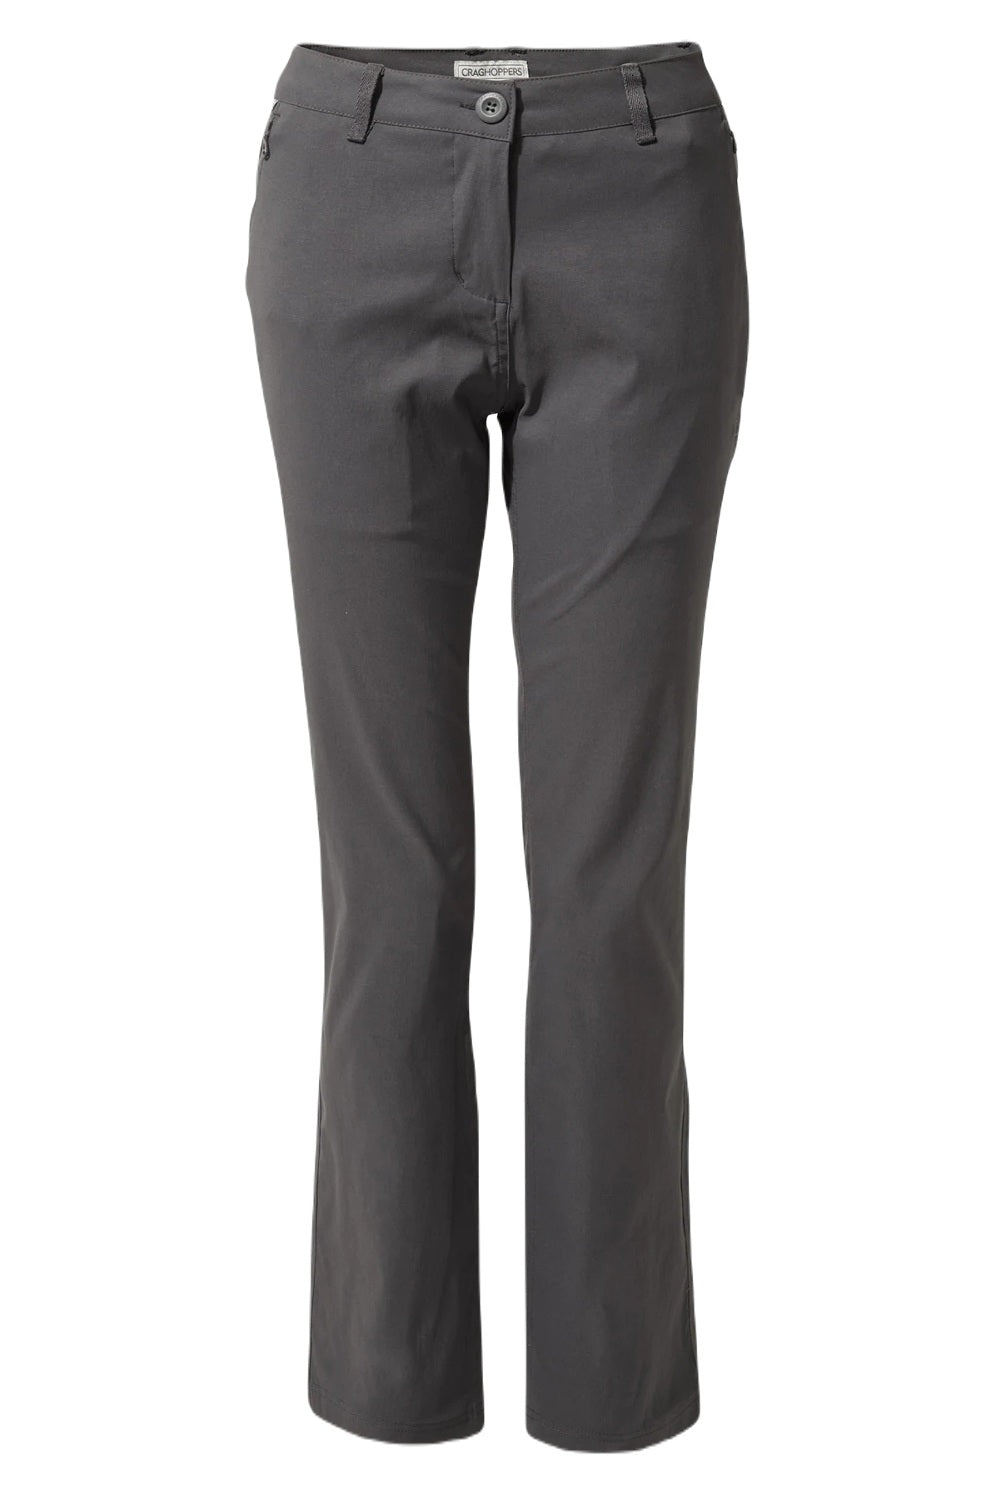 Craghoppers Kiwi Pro Ladies Trousers in Graphite